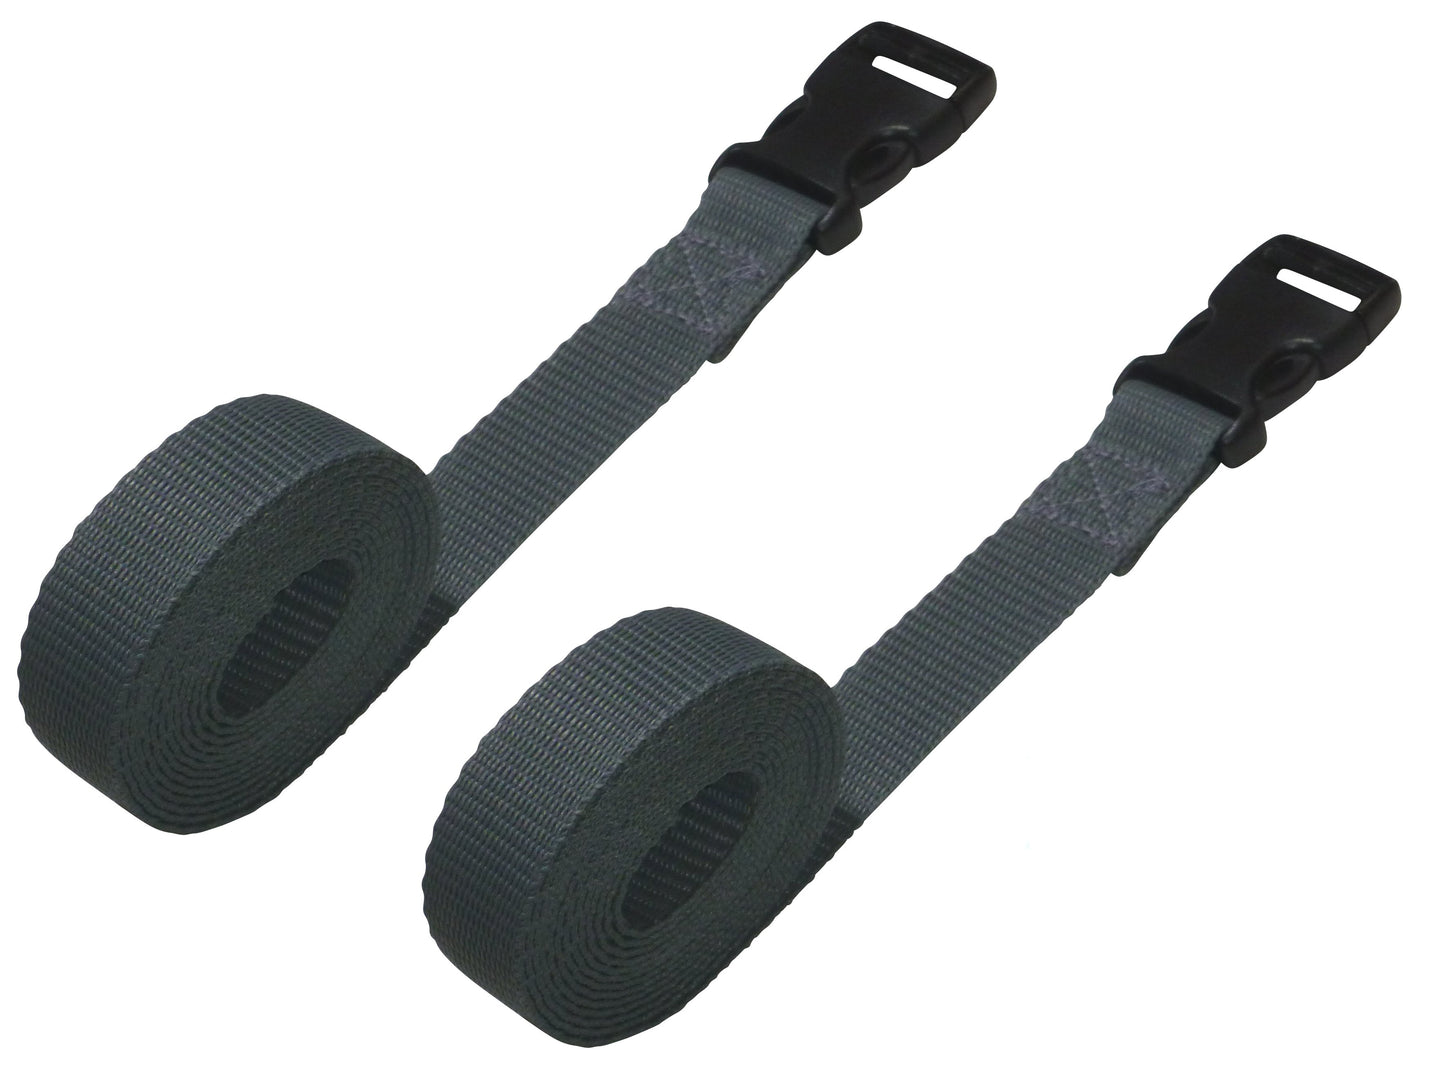 Benristraps 25mm Webbing Strap with Quick Release Buckle (Pair) in grey